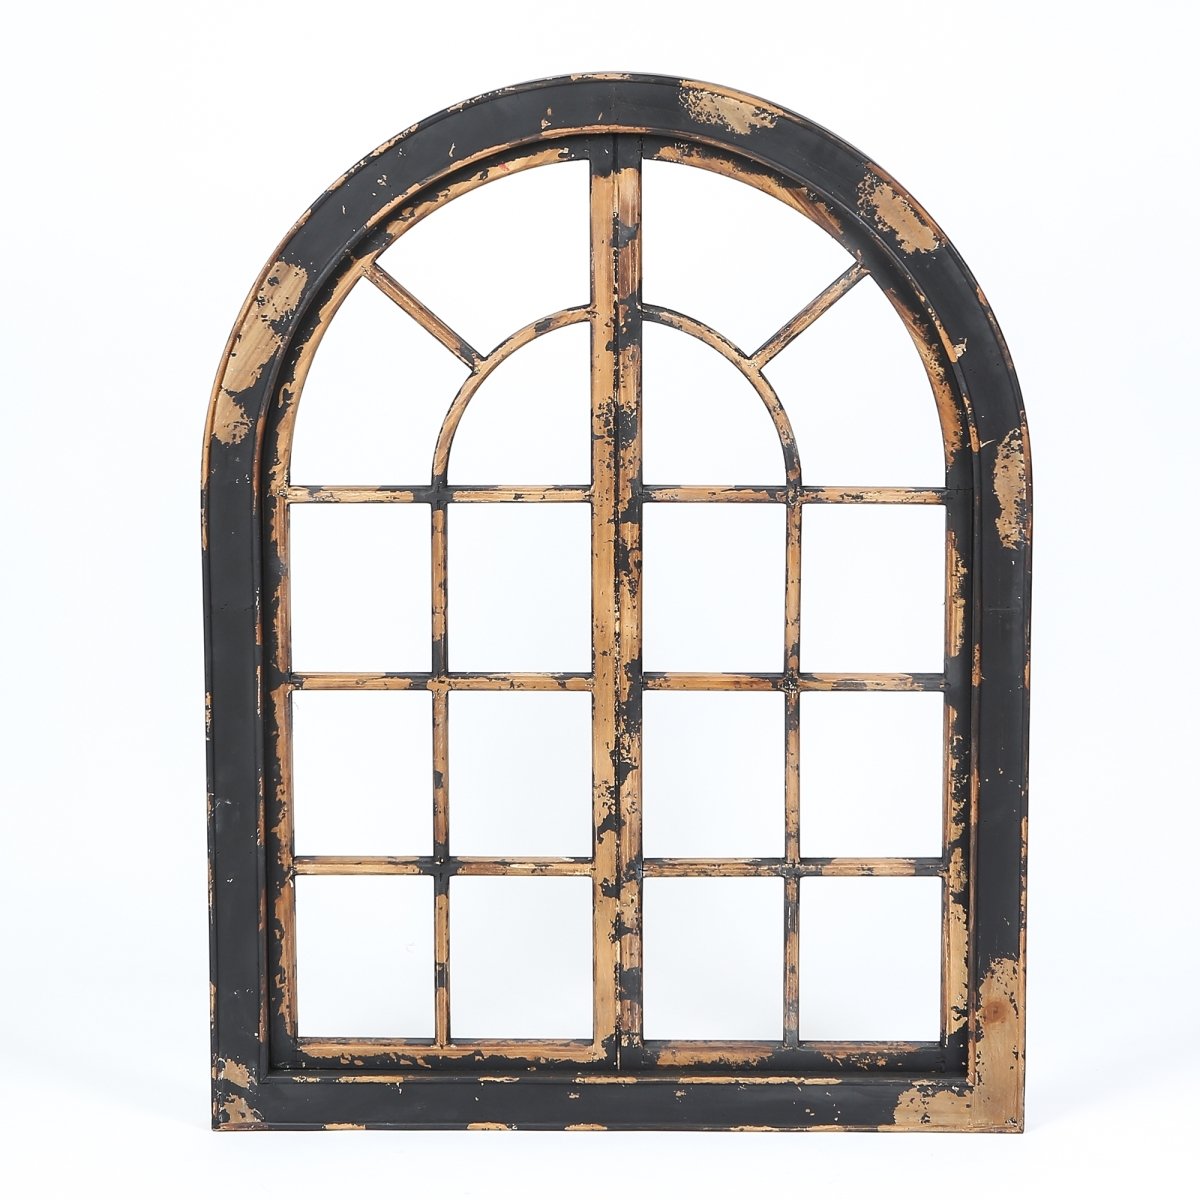 Luxen Home Wha574 47.5 In. Wood Arched Window Wall Decor